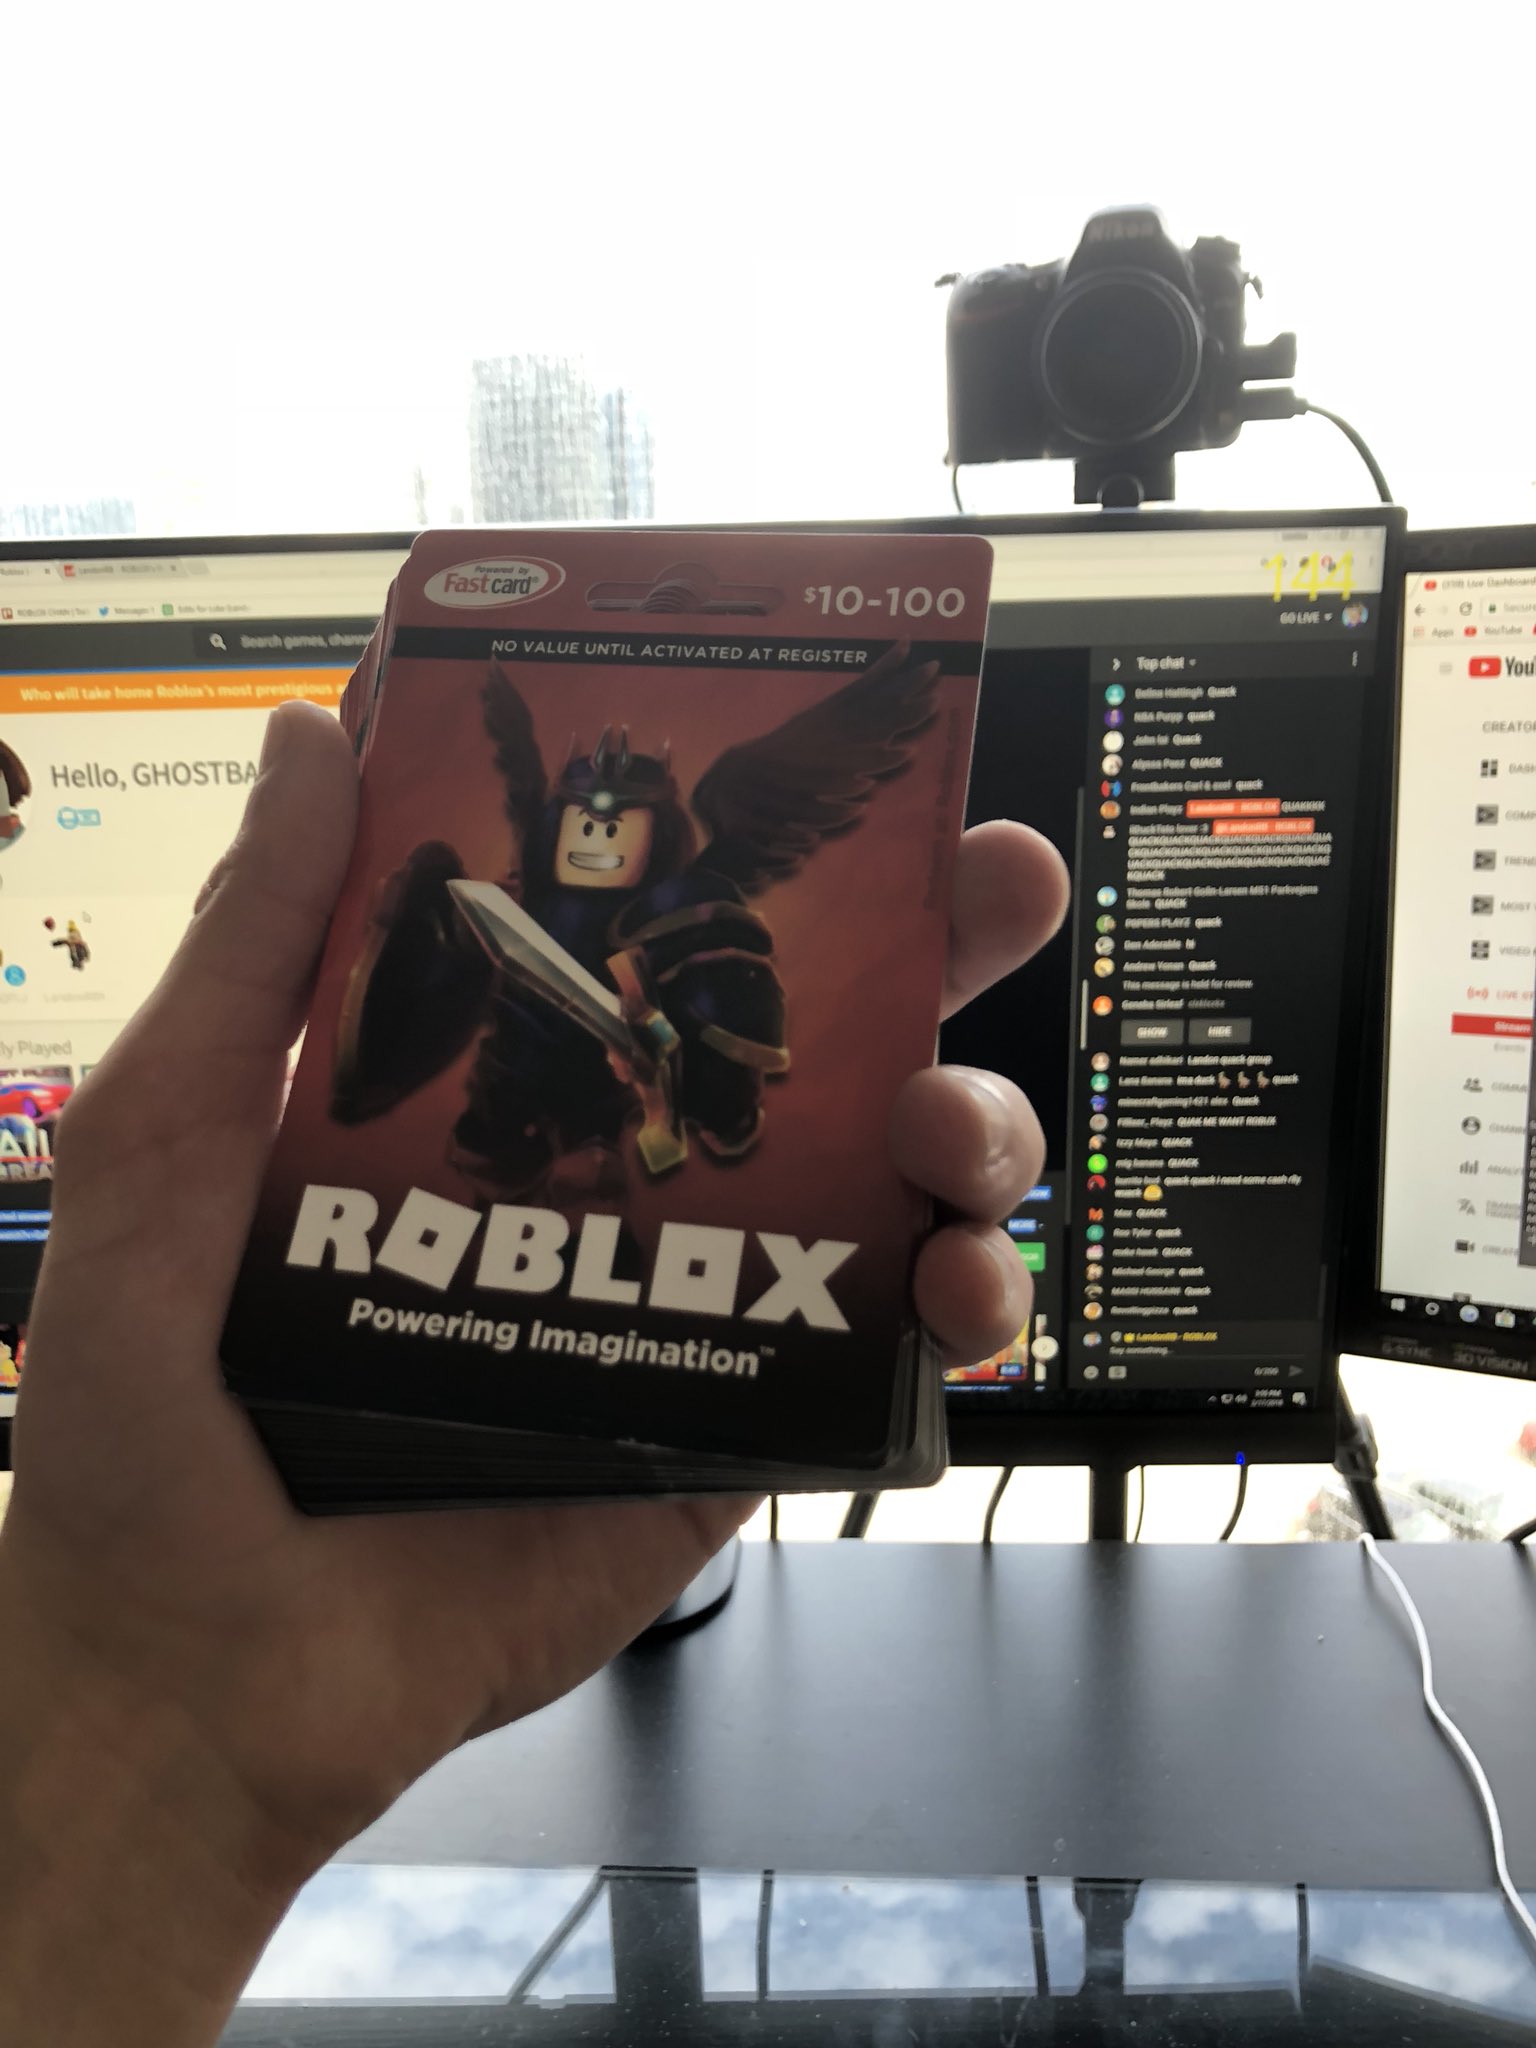 Landon On Twitter Rt Follow For A Free Robux Giftcard No Meme